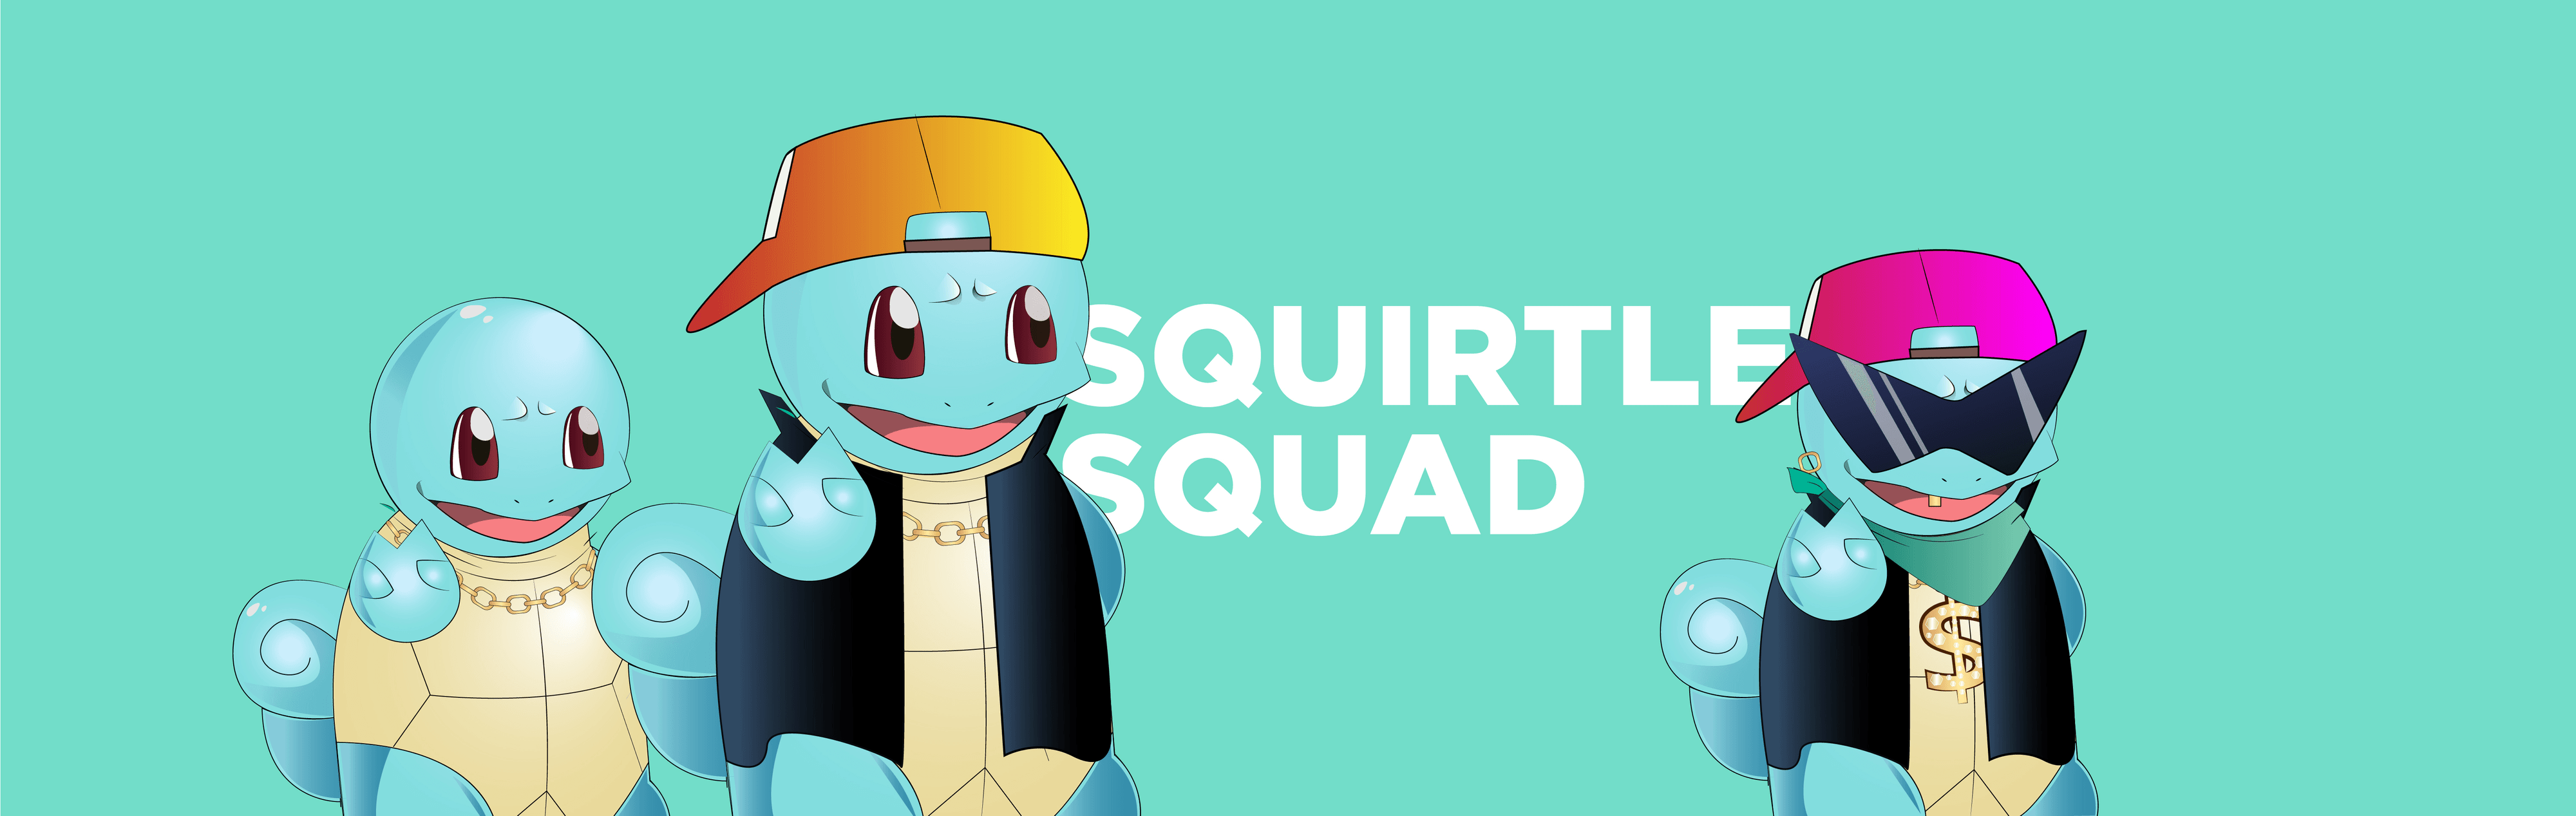 Squirtle_SQUAD_nft 배너